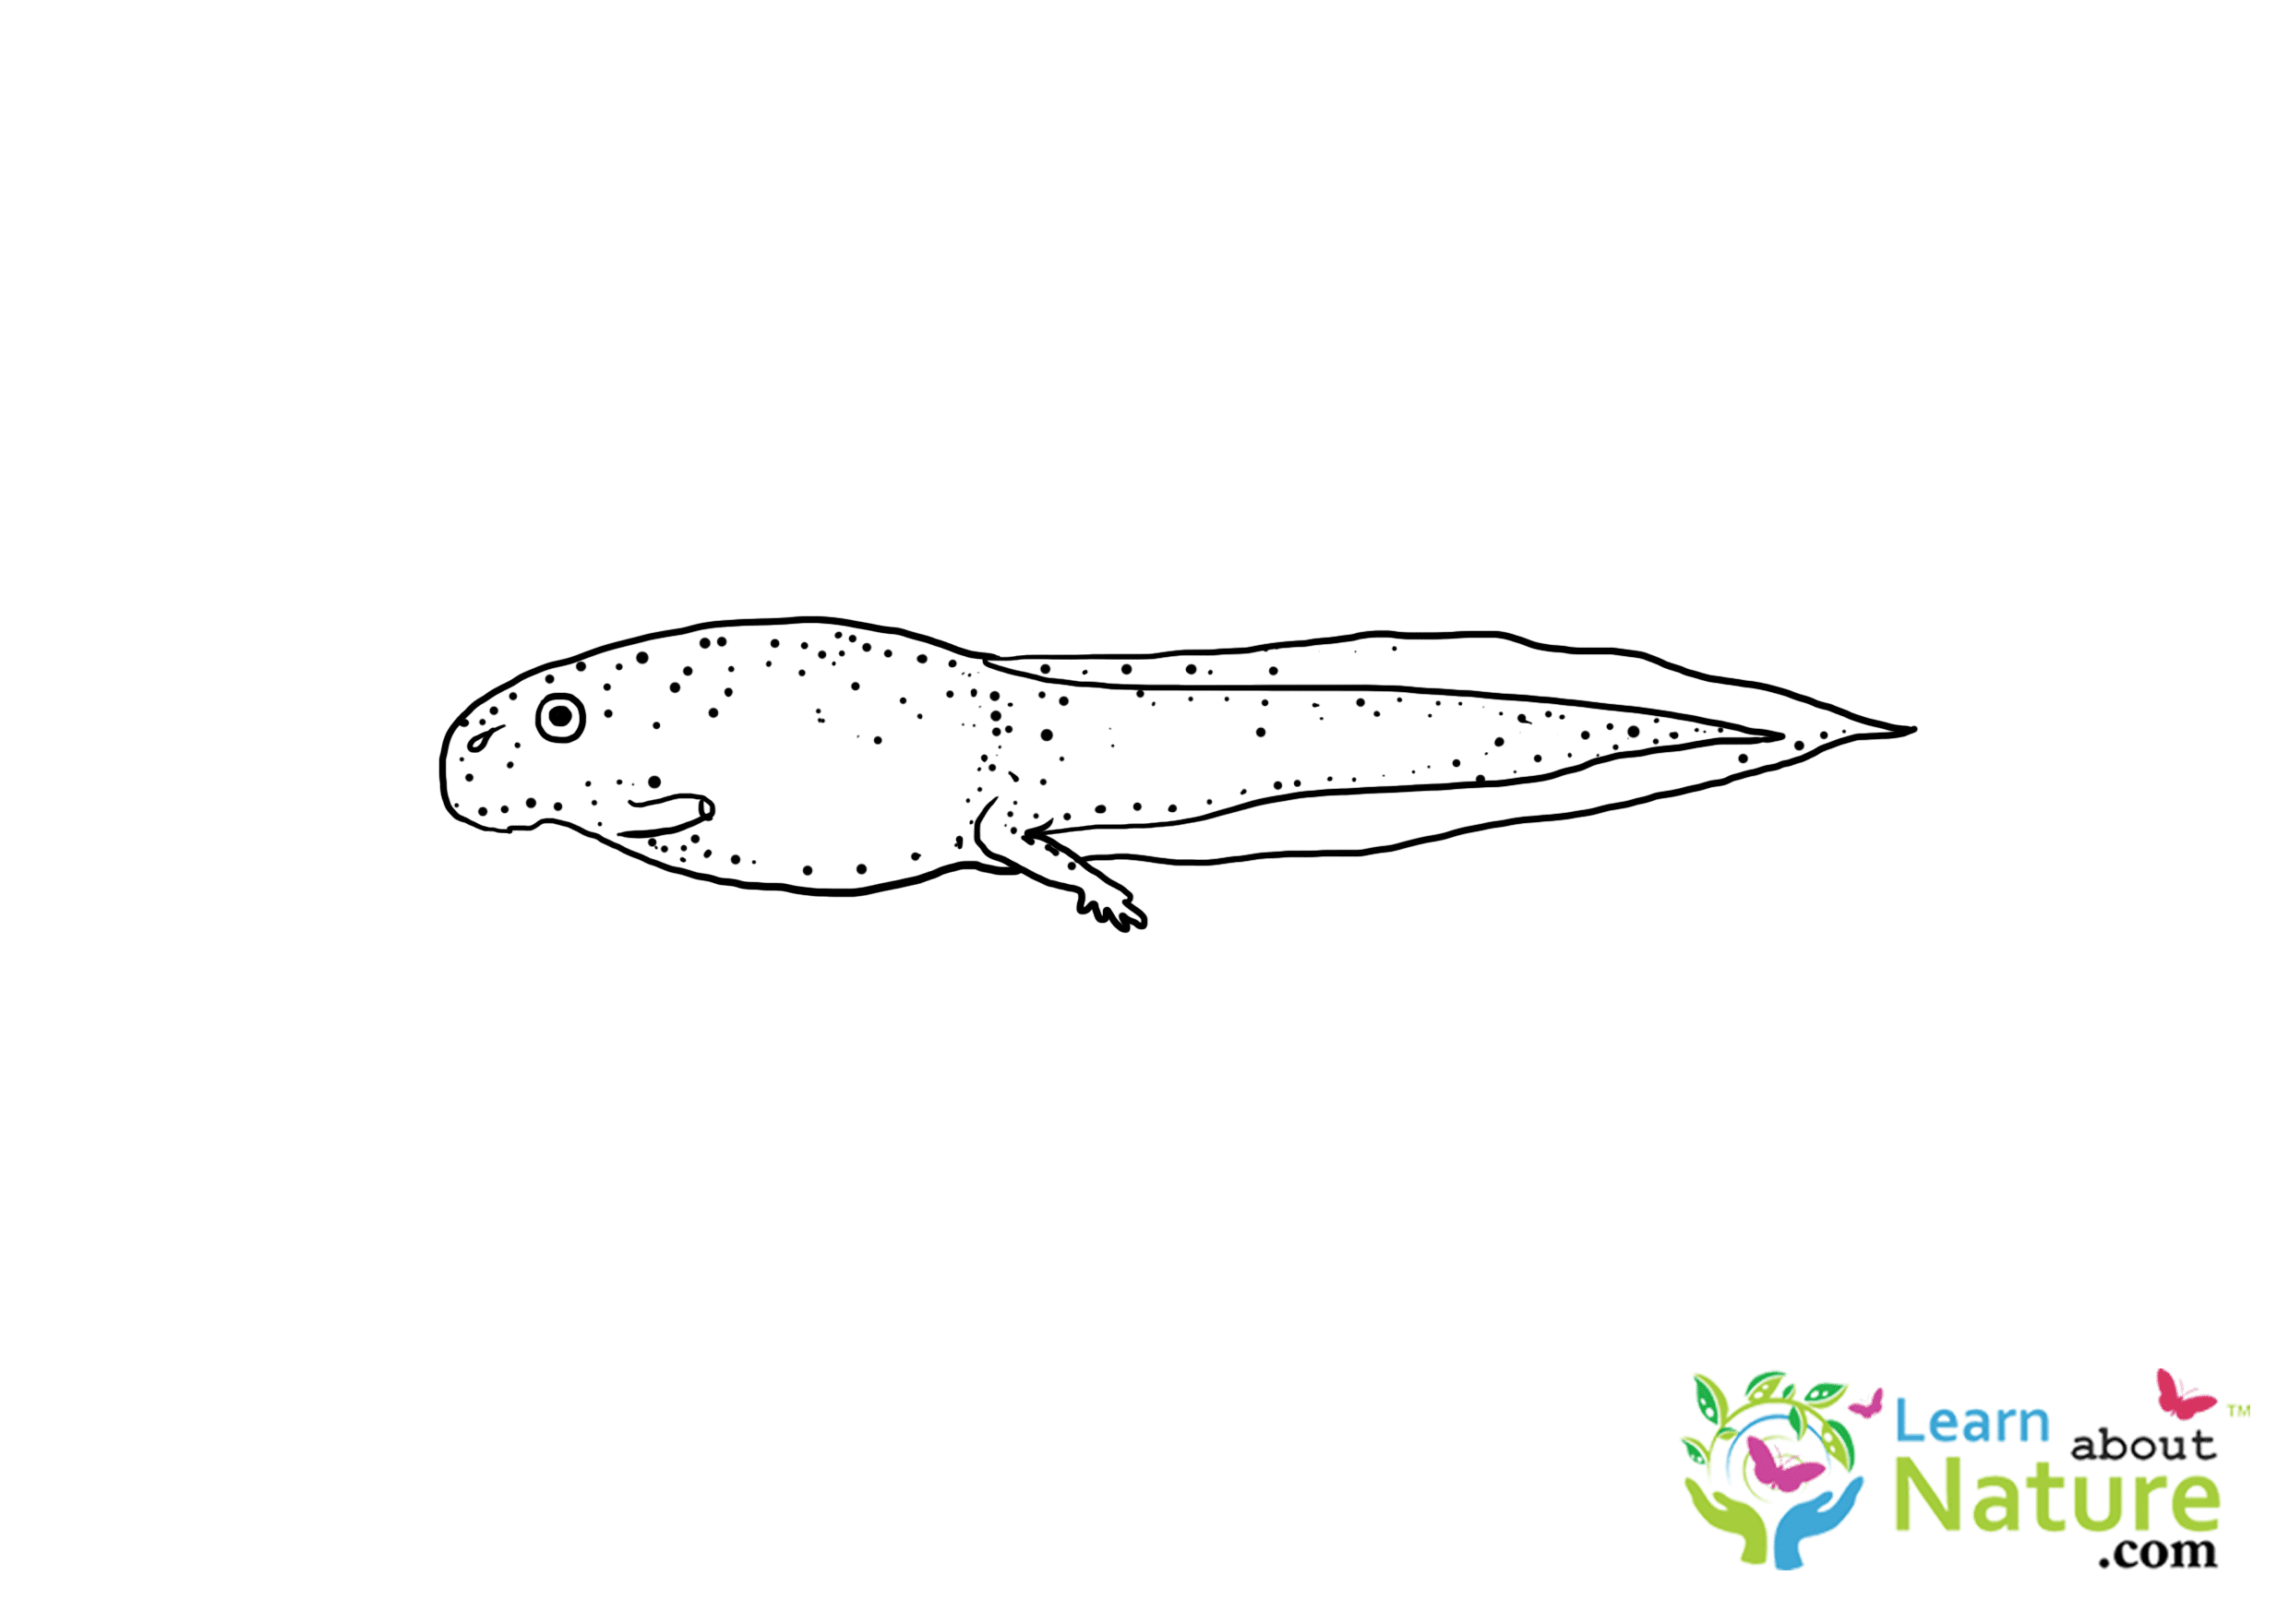 tadpole-coloring-page-5 - Learn About Nature